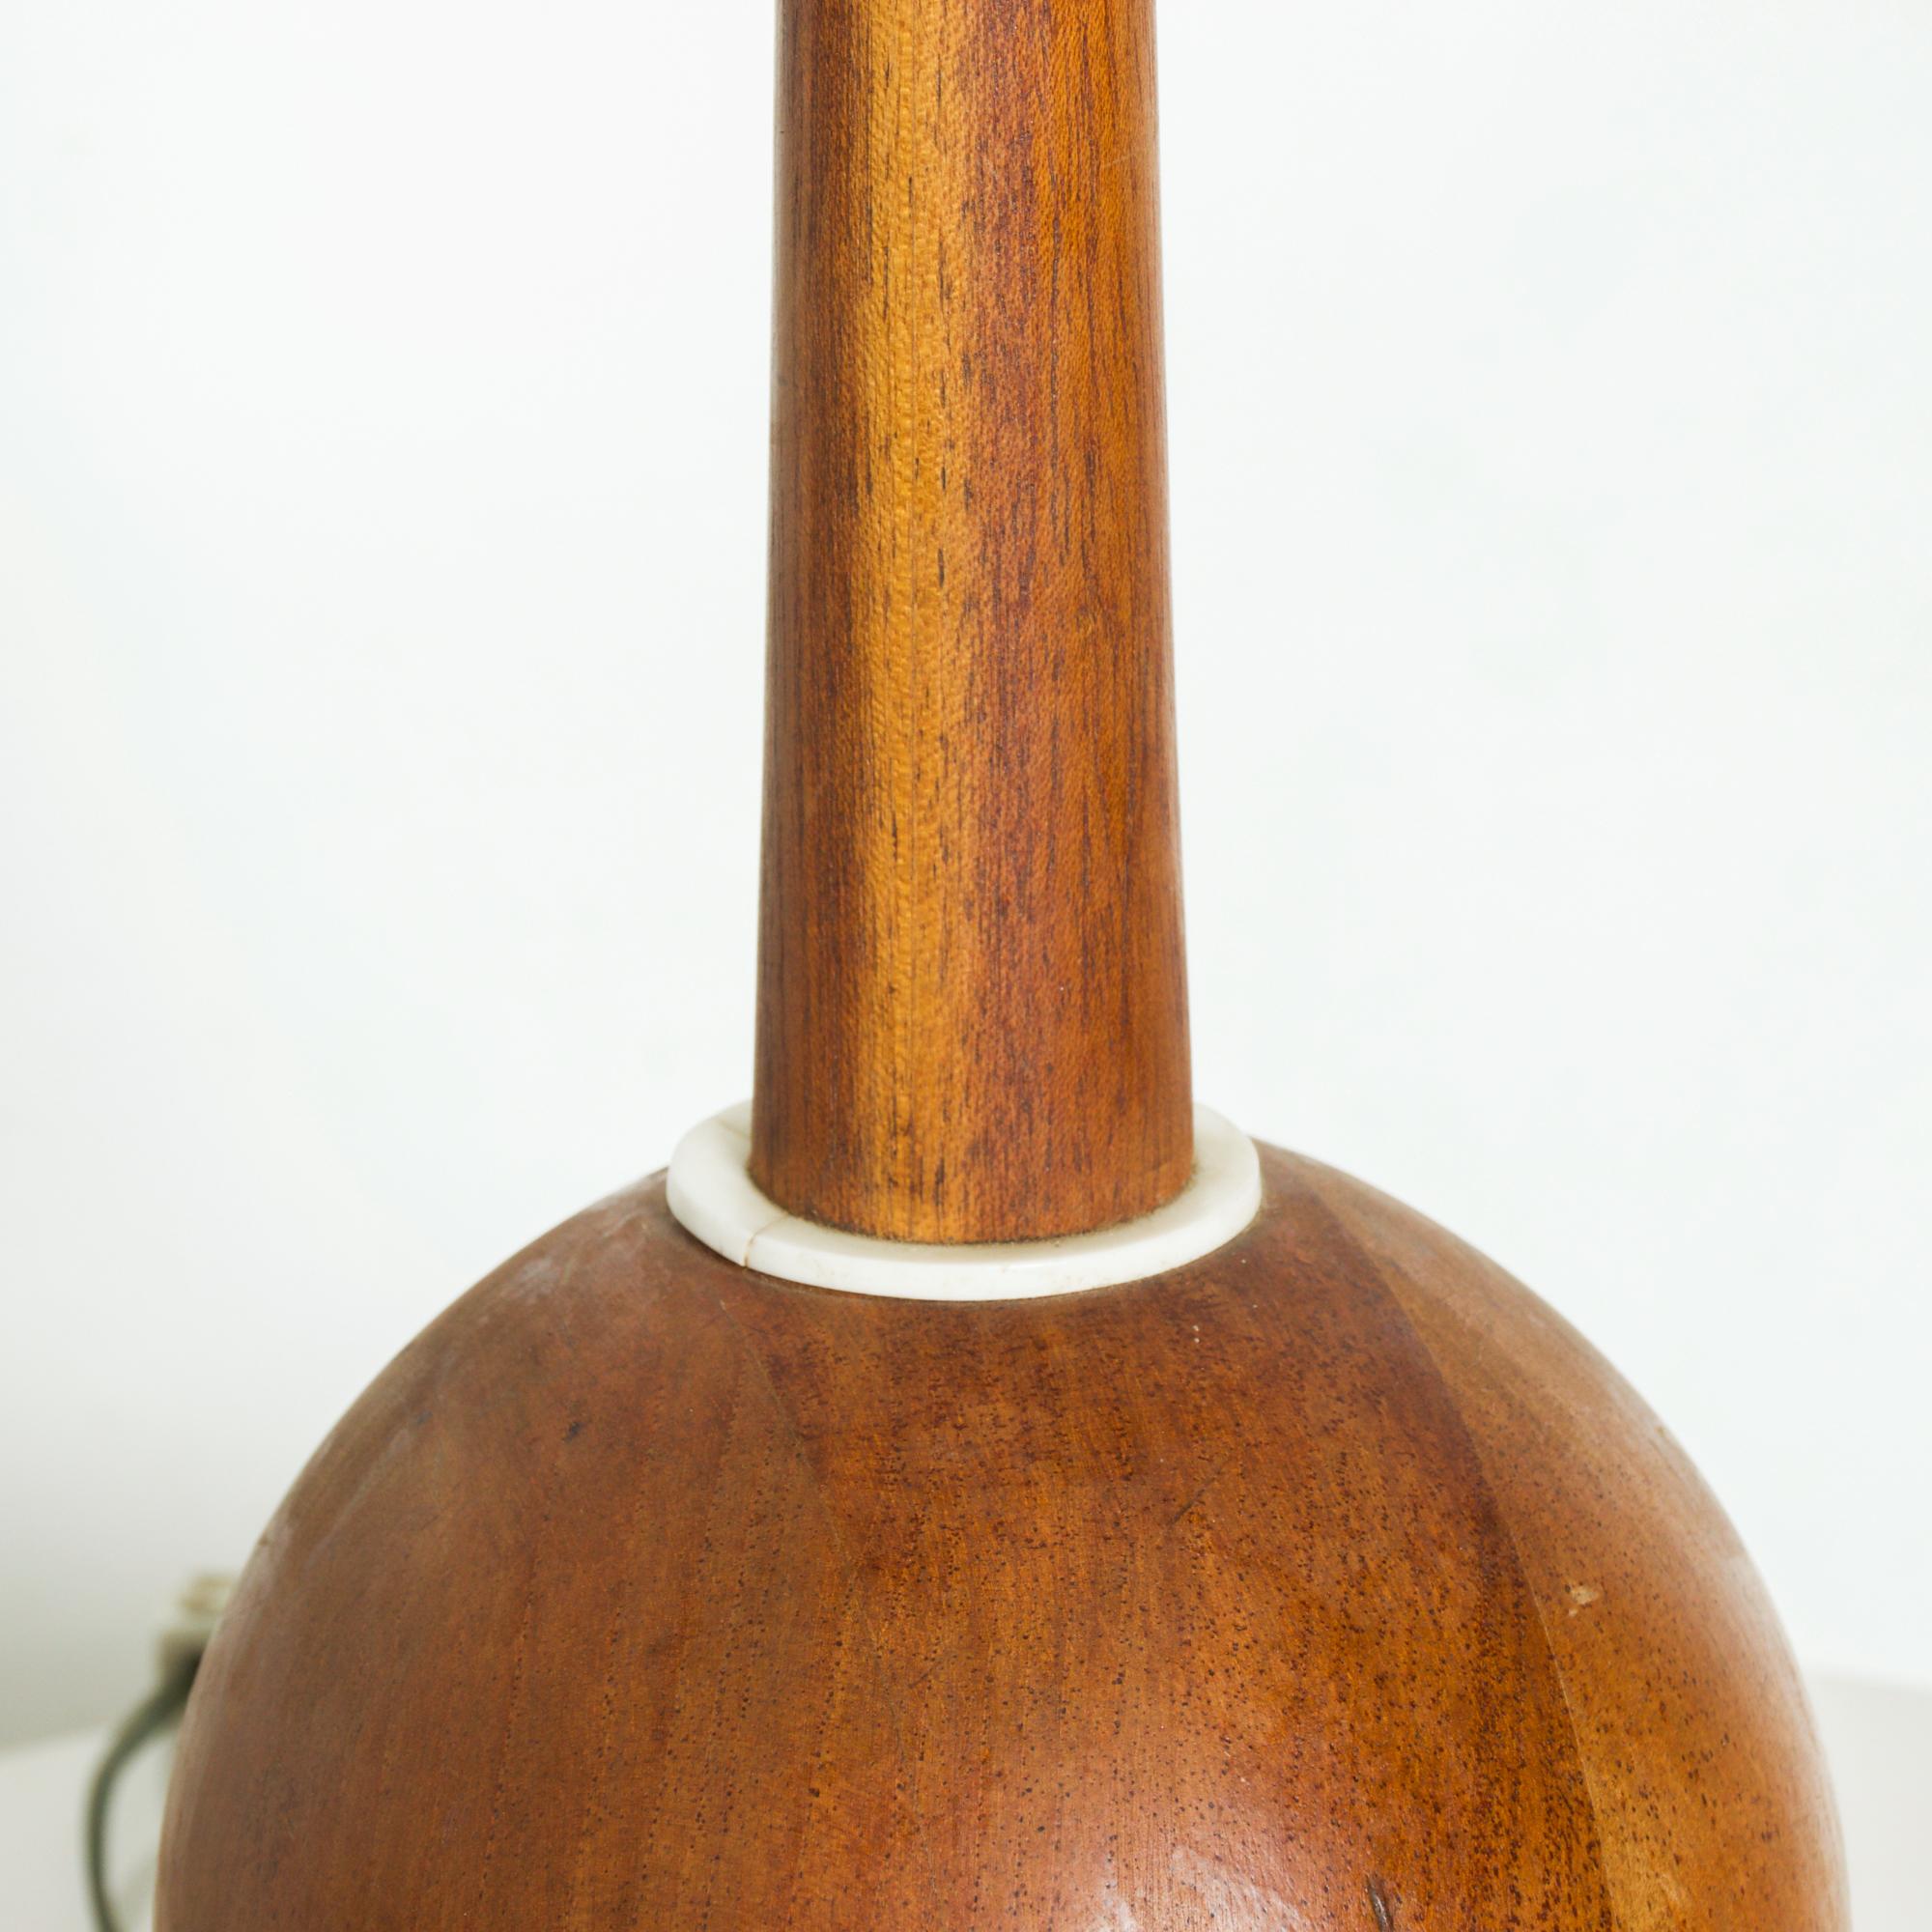 Mid-20th Century Modernist Sculptural Globe Table Lamp in Mahogany Wood 1960s style Tony Paul